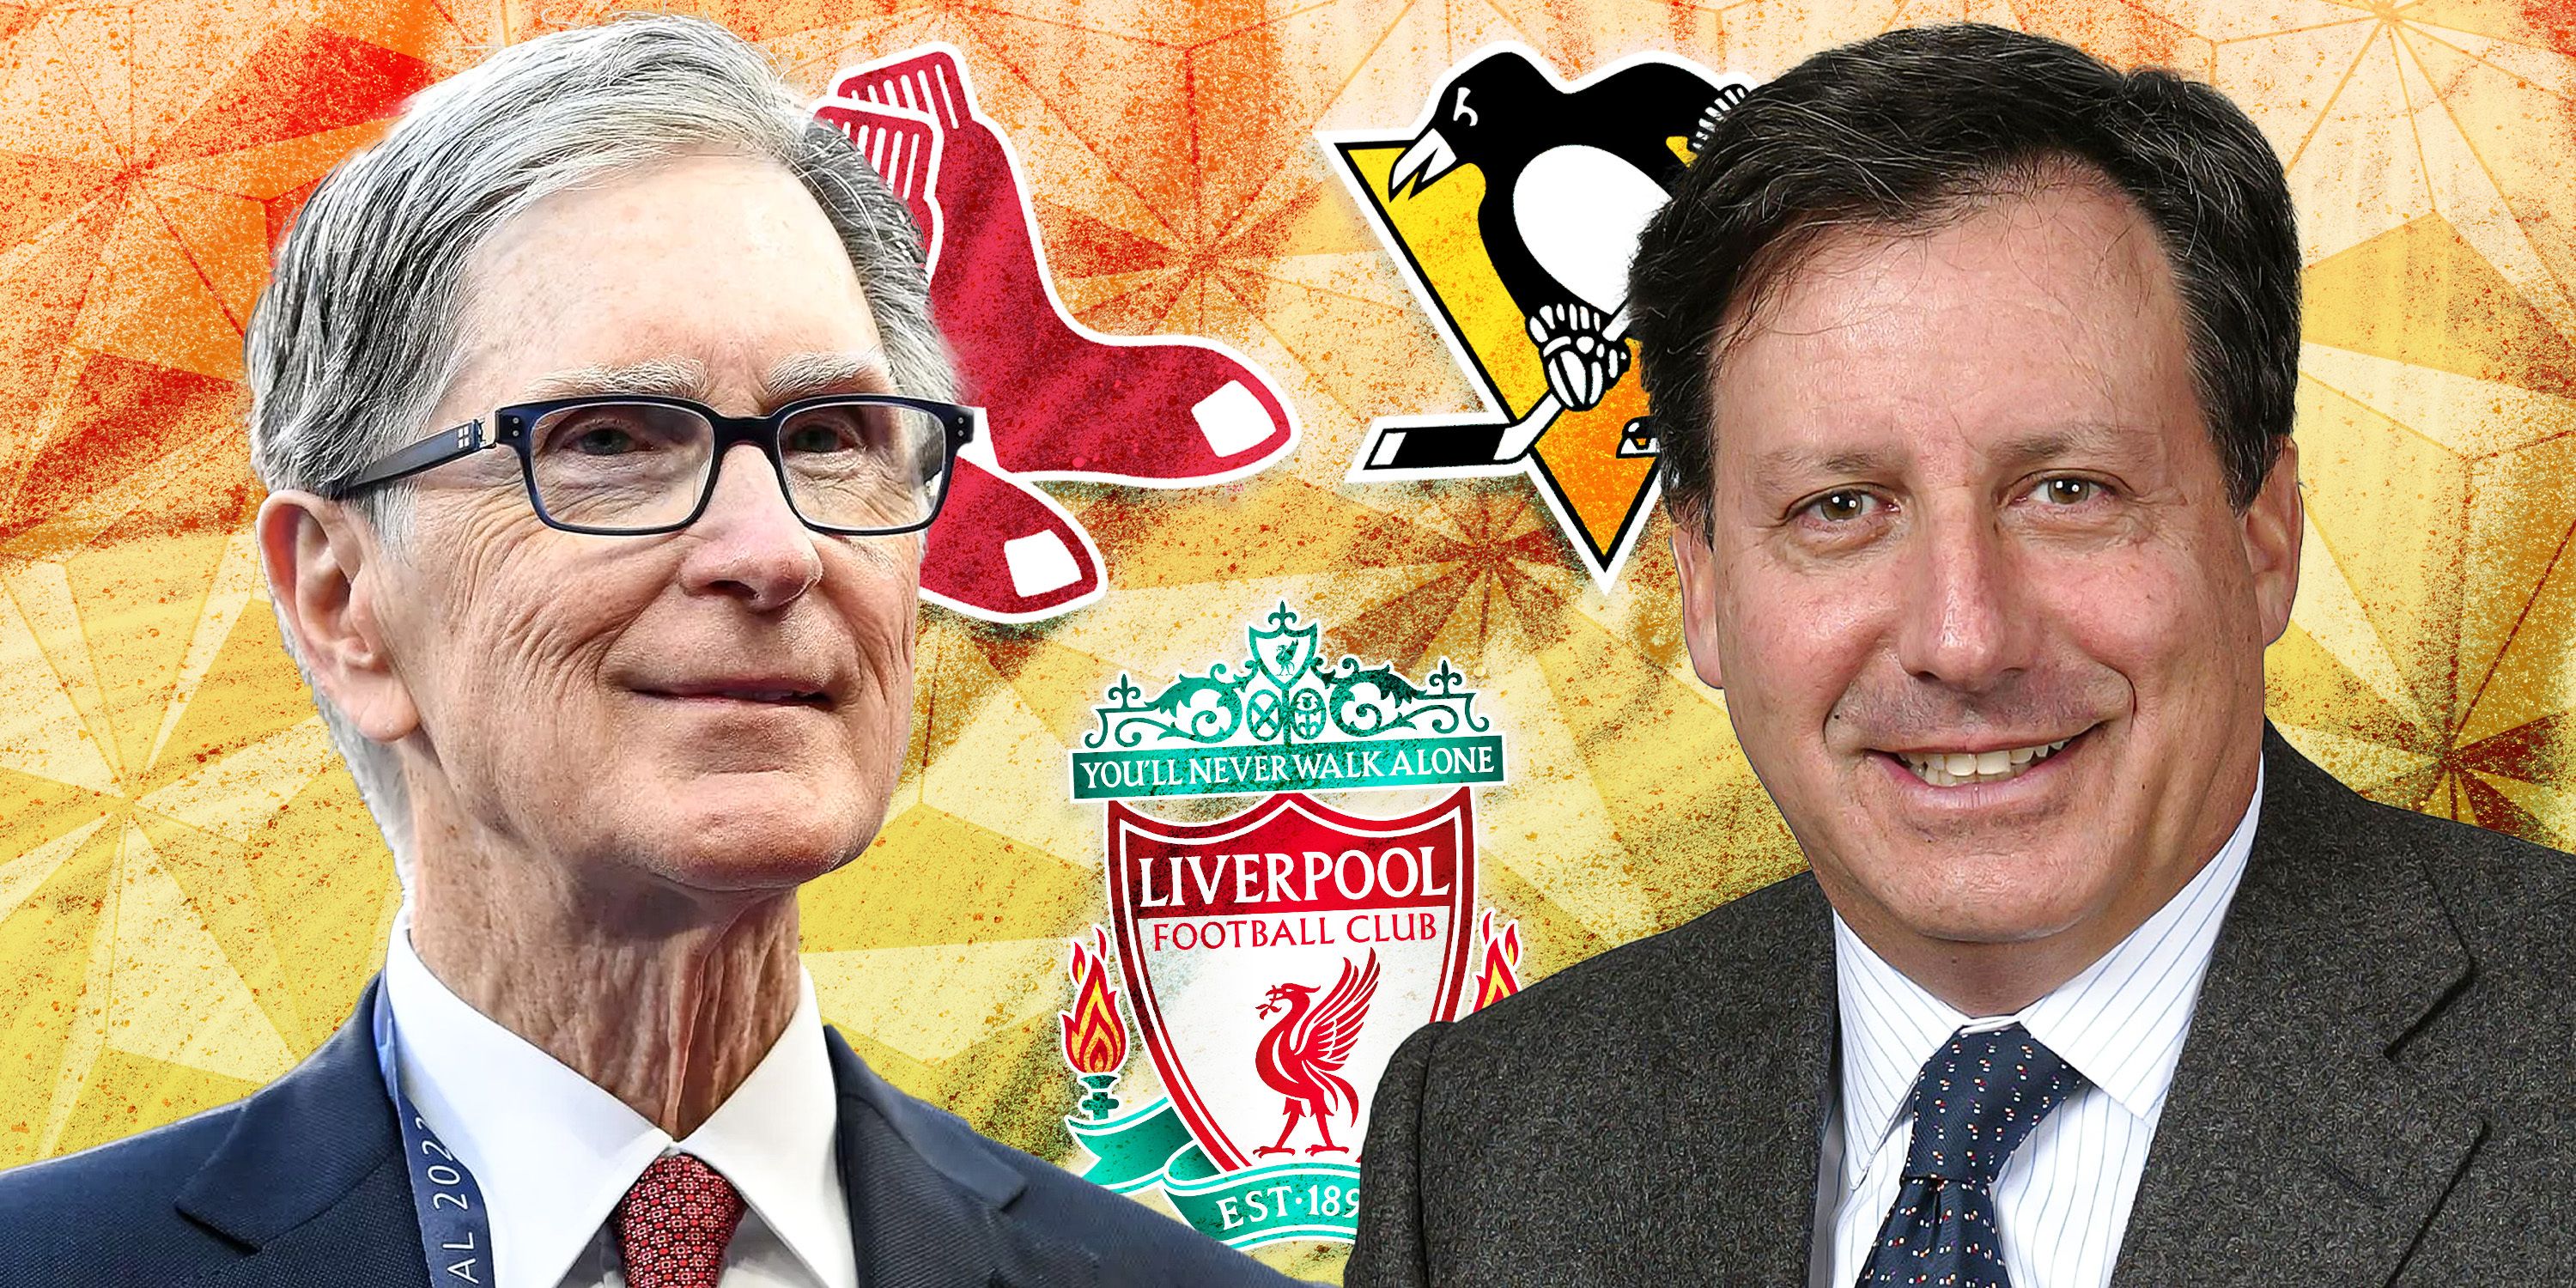 Custom image of FSG chiefs John W. Henry and Tom Werner in front of the club badges that they control